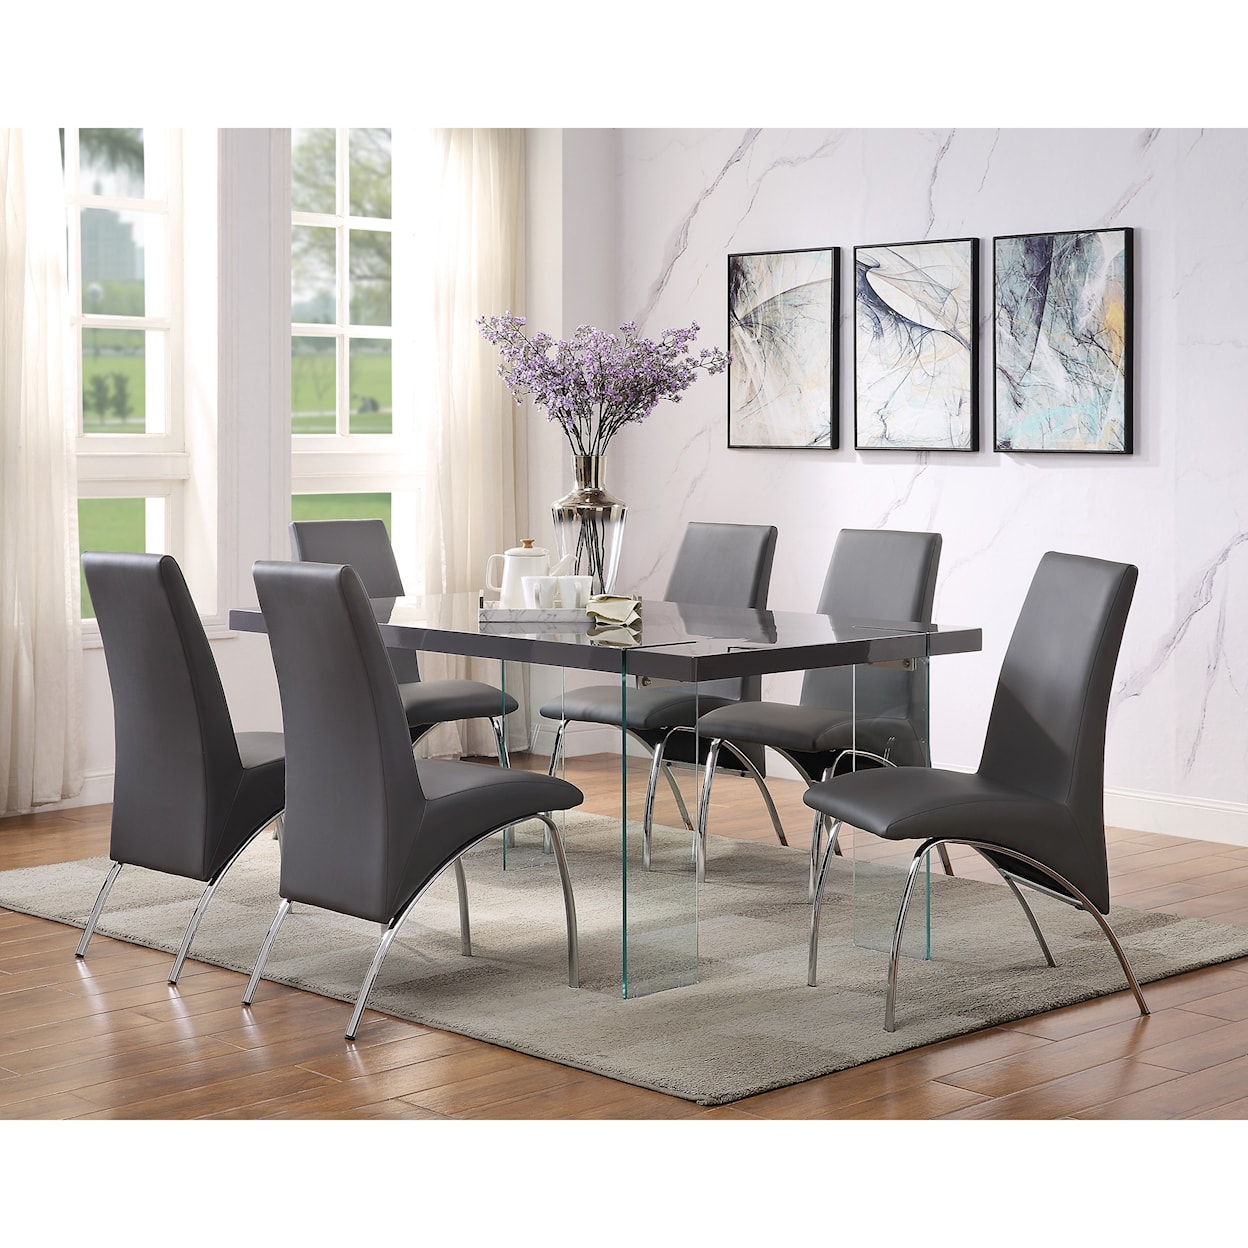 Acme Furniture Noland Dining Set with 6 Chairs